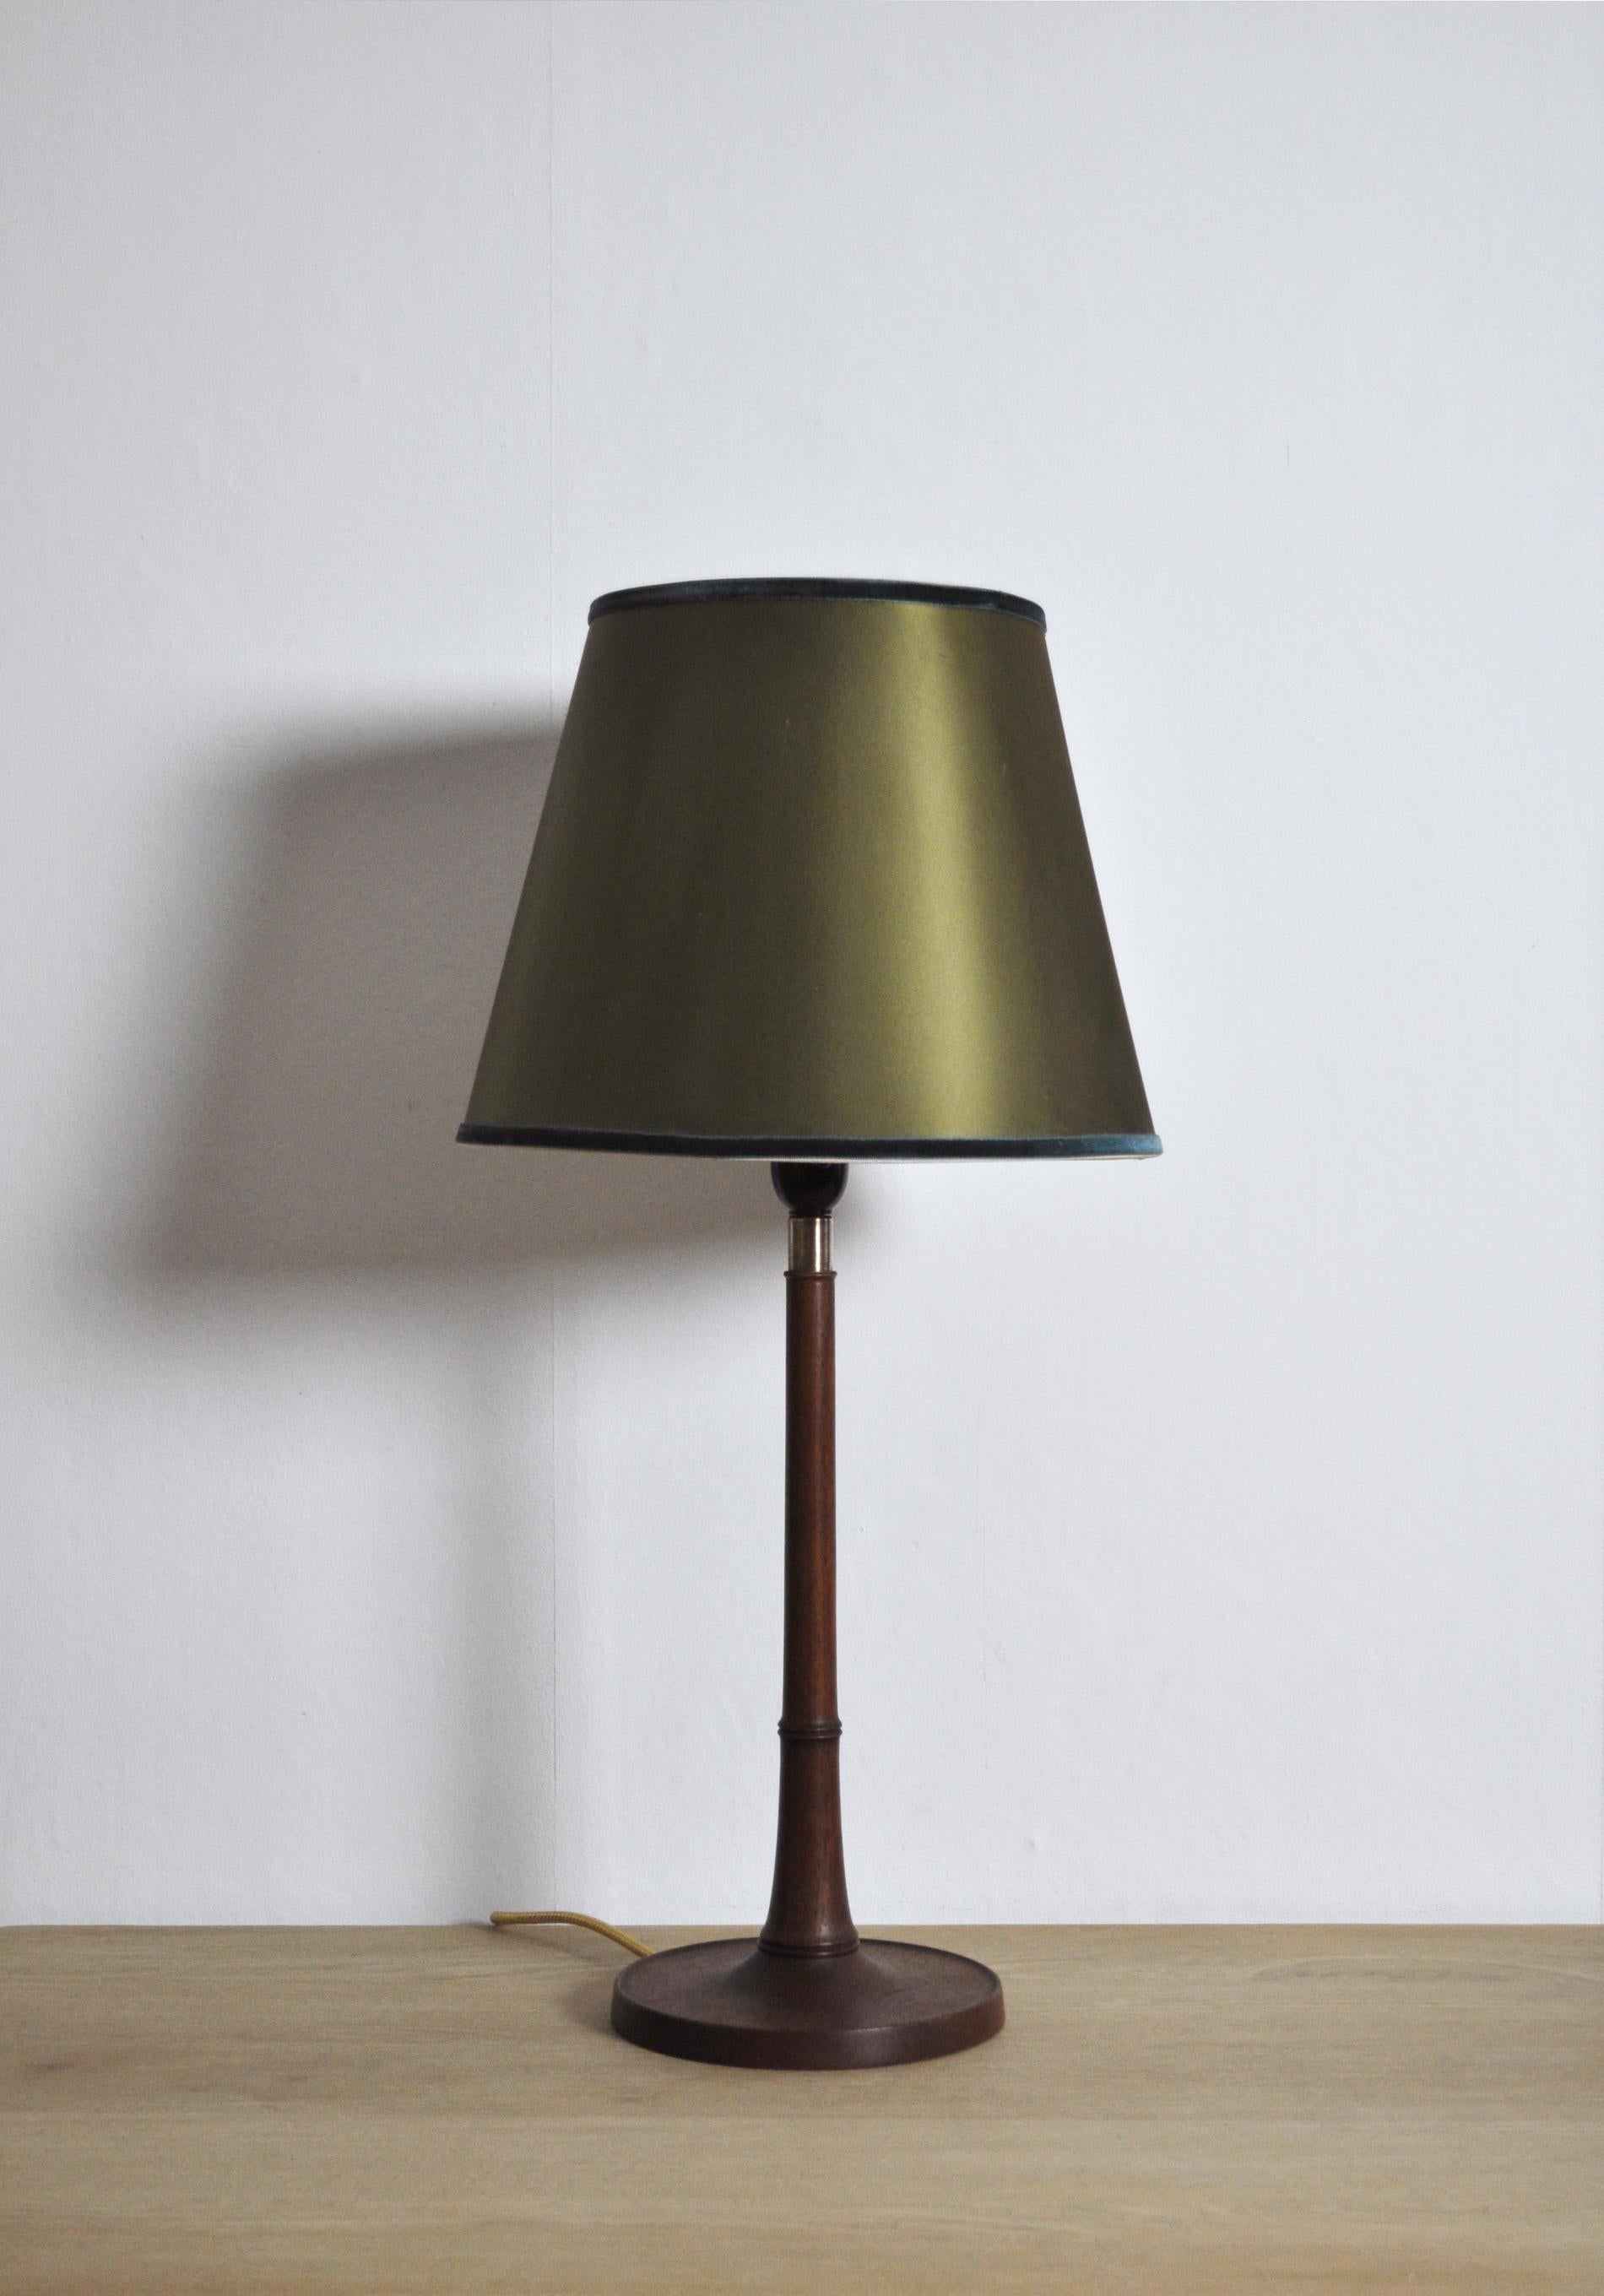 Danish solid teak and brass table lamp by Lyfa, Denmark, 1960s.
Light source: ES7 Edison screw fitting.
Rewired. Item comes without shade.
Dimensions: Height 65 with shade, 46 cm without shade 
Base diameter 18 cm.